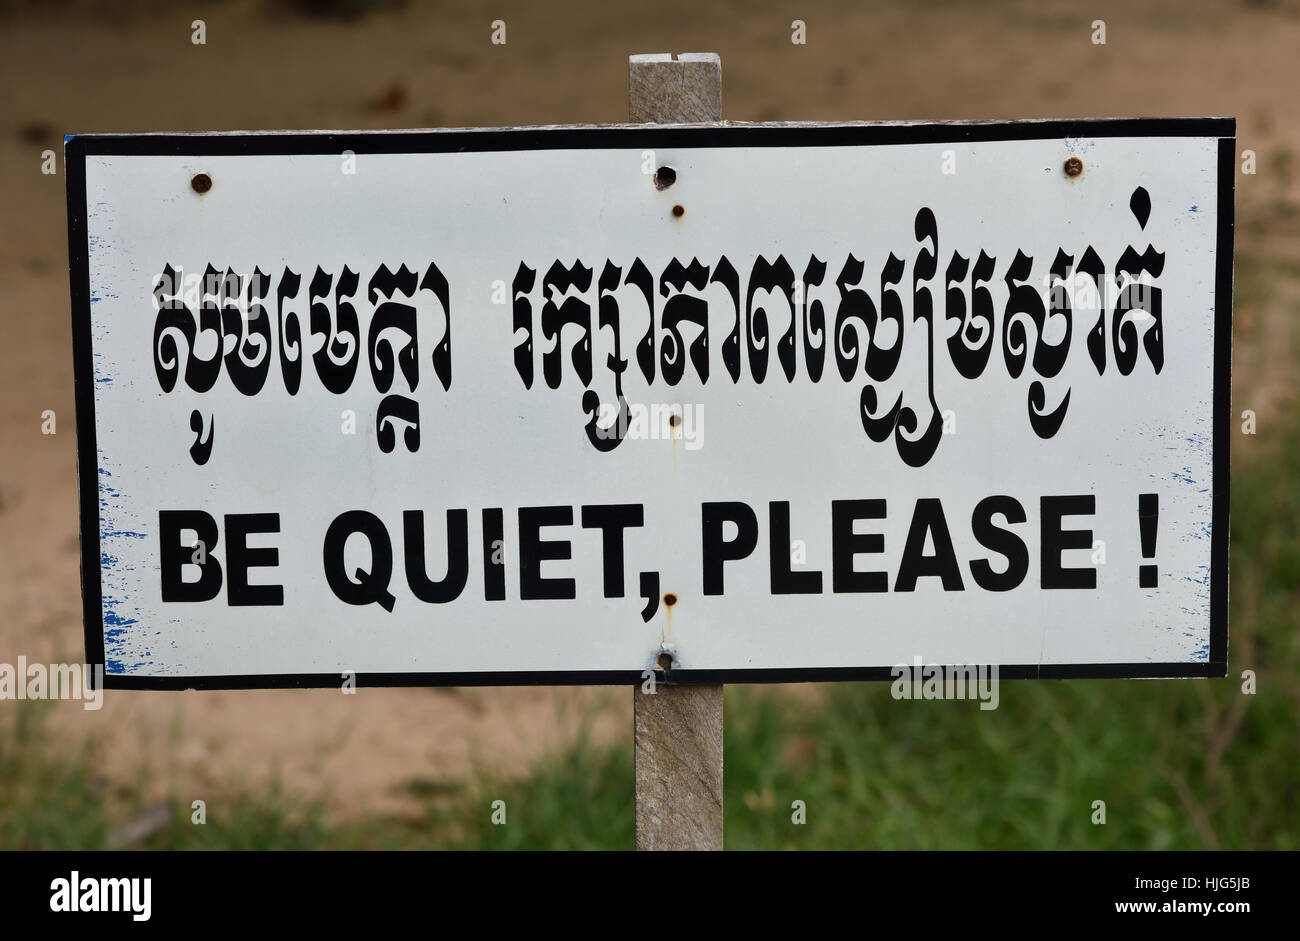 Be Quiet Please - Memorial Site The Killing Fields - Choeung Ek Museum of Cambodia  ( Mass grave of victims by Pol Pot - Khmer Rouge  from 1963 - 1997. ) Phnom Penh Cambodia Stock Photo